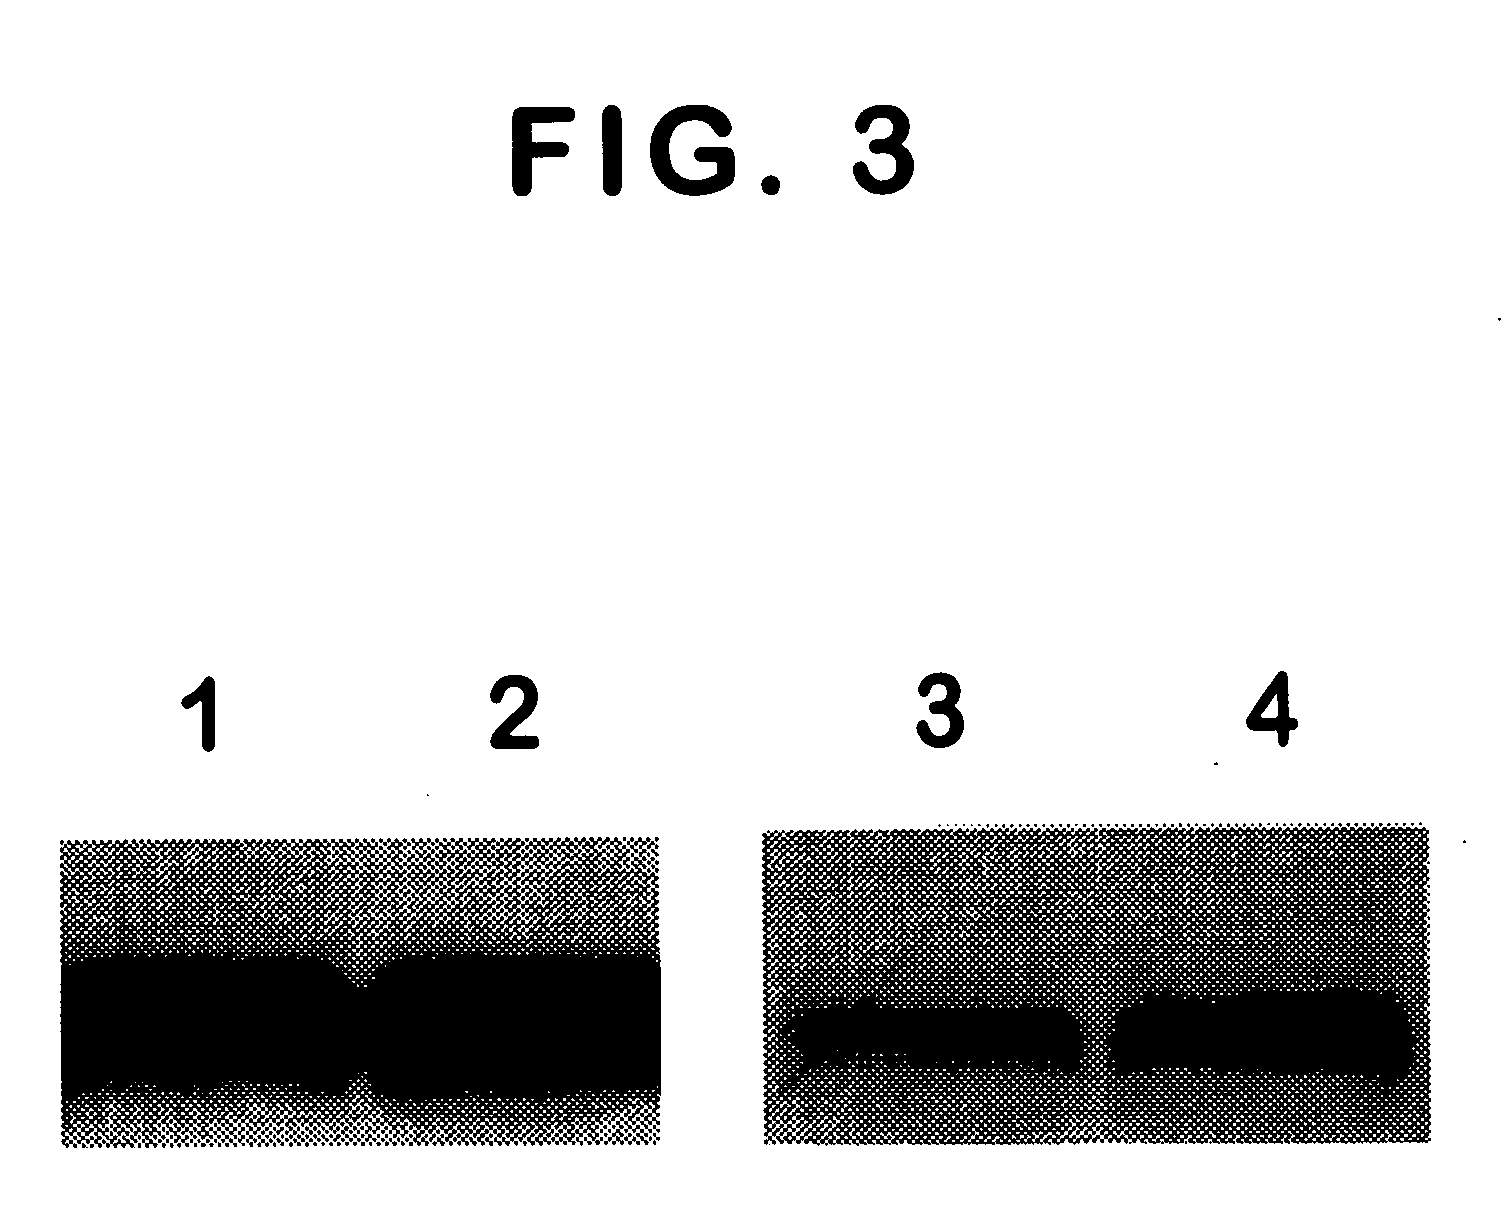 Monoclonal antibody specific for the extracellular domain of prostate specific membrane antigen